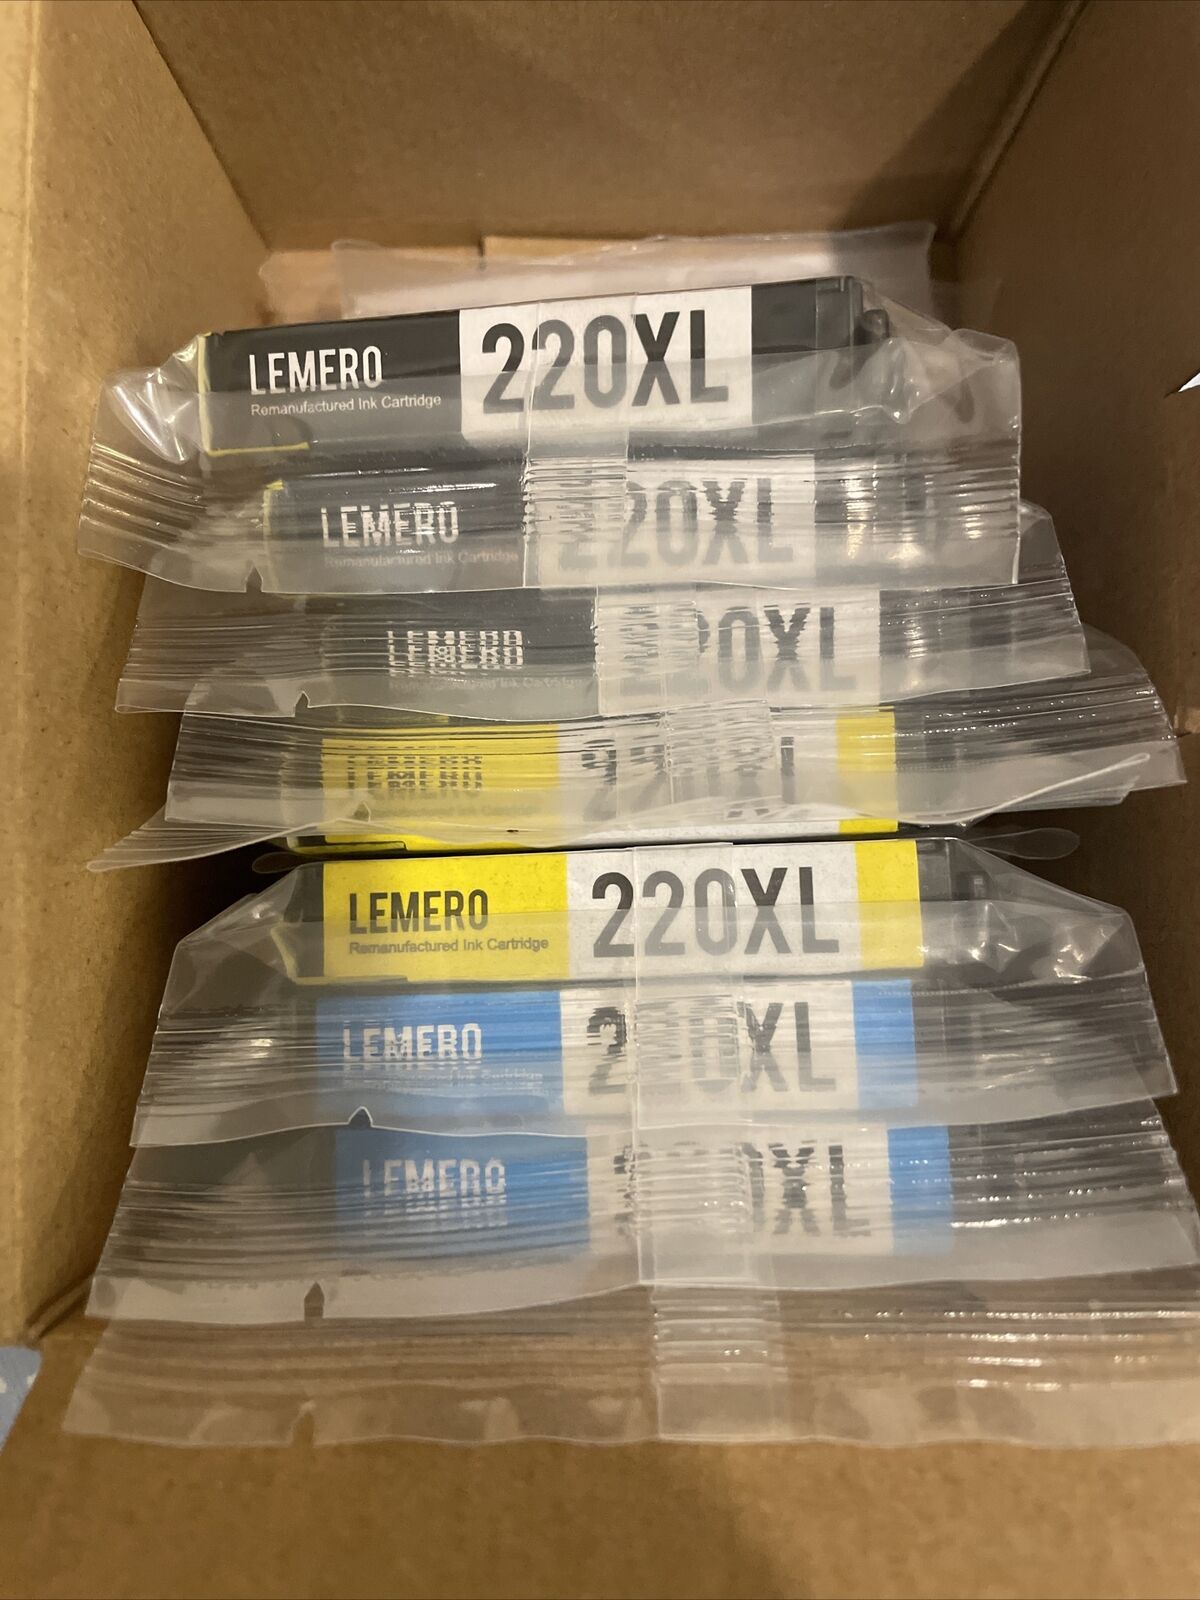 7 Cartridges - Lemero Replacement Ink Cartridges for 220XL New, Sealed, Open Box